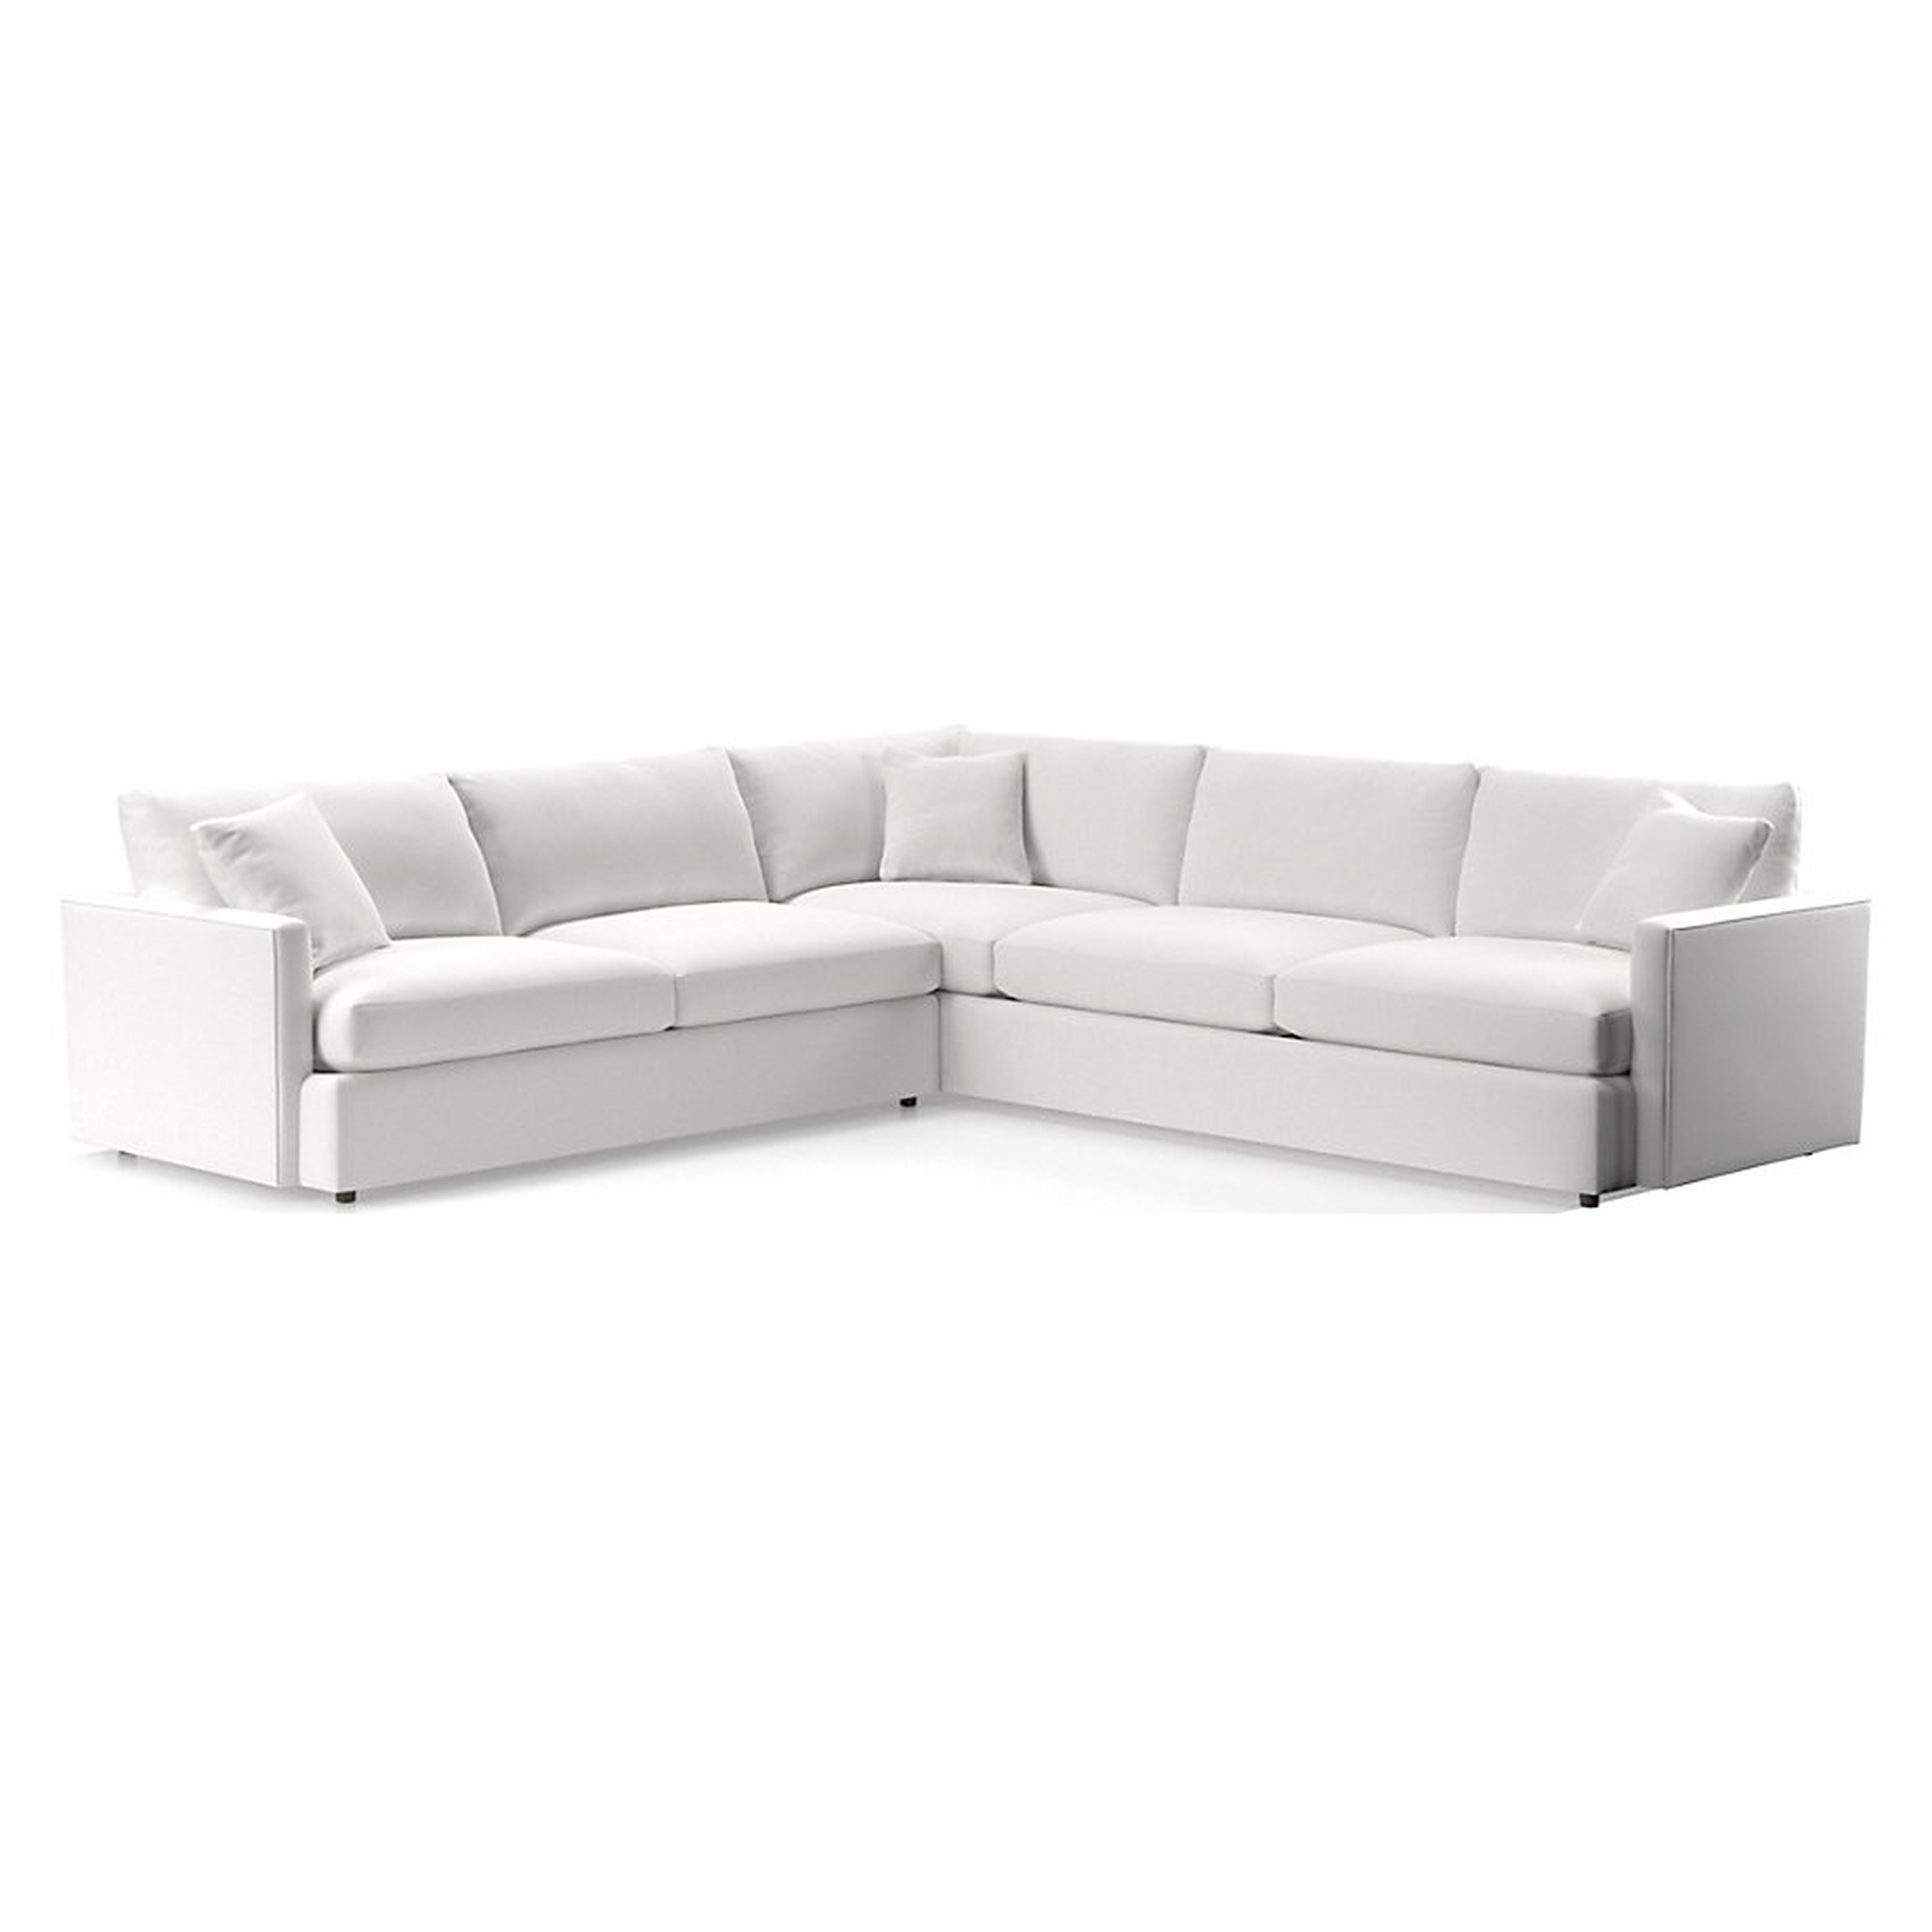 Lounge 2-Piece L-Shaped Sectional with Right-Arm Corner Sofa - Crate and Barrel